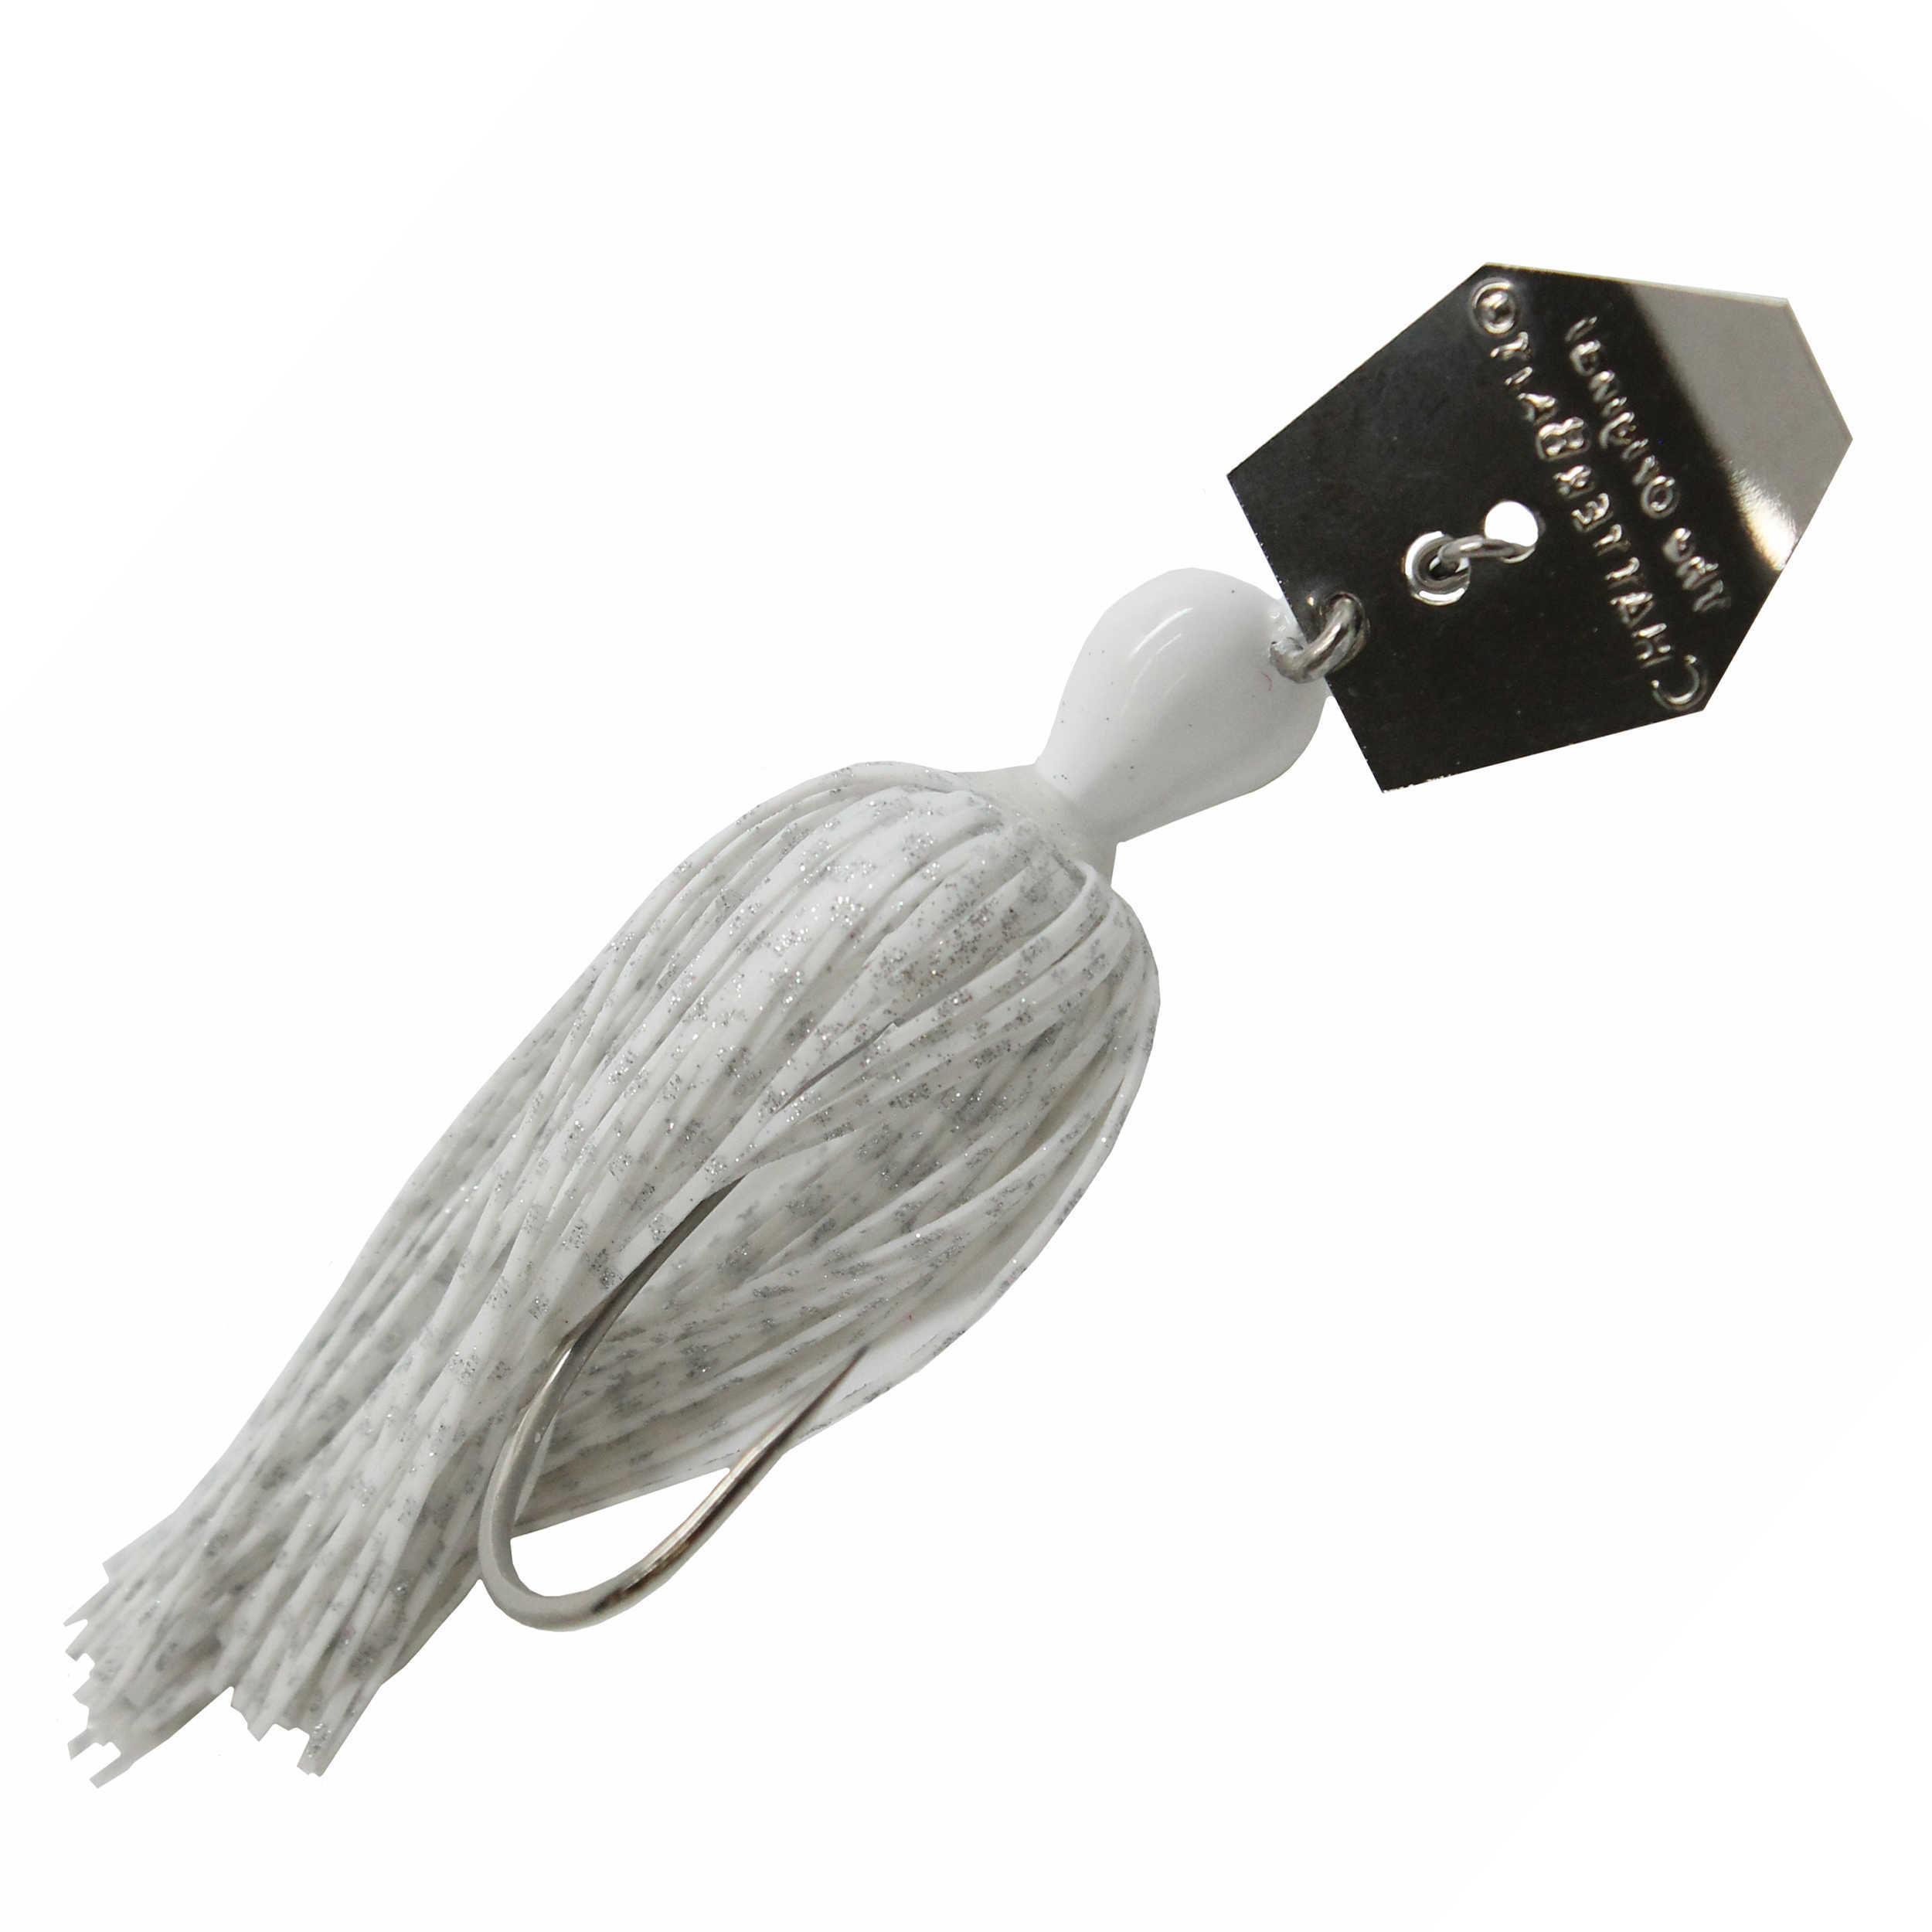 Z-Man Fishing Products Chatter Bait 1/2 Ounce 5/0 Hook Size White Lure, Md: CB12-15